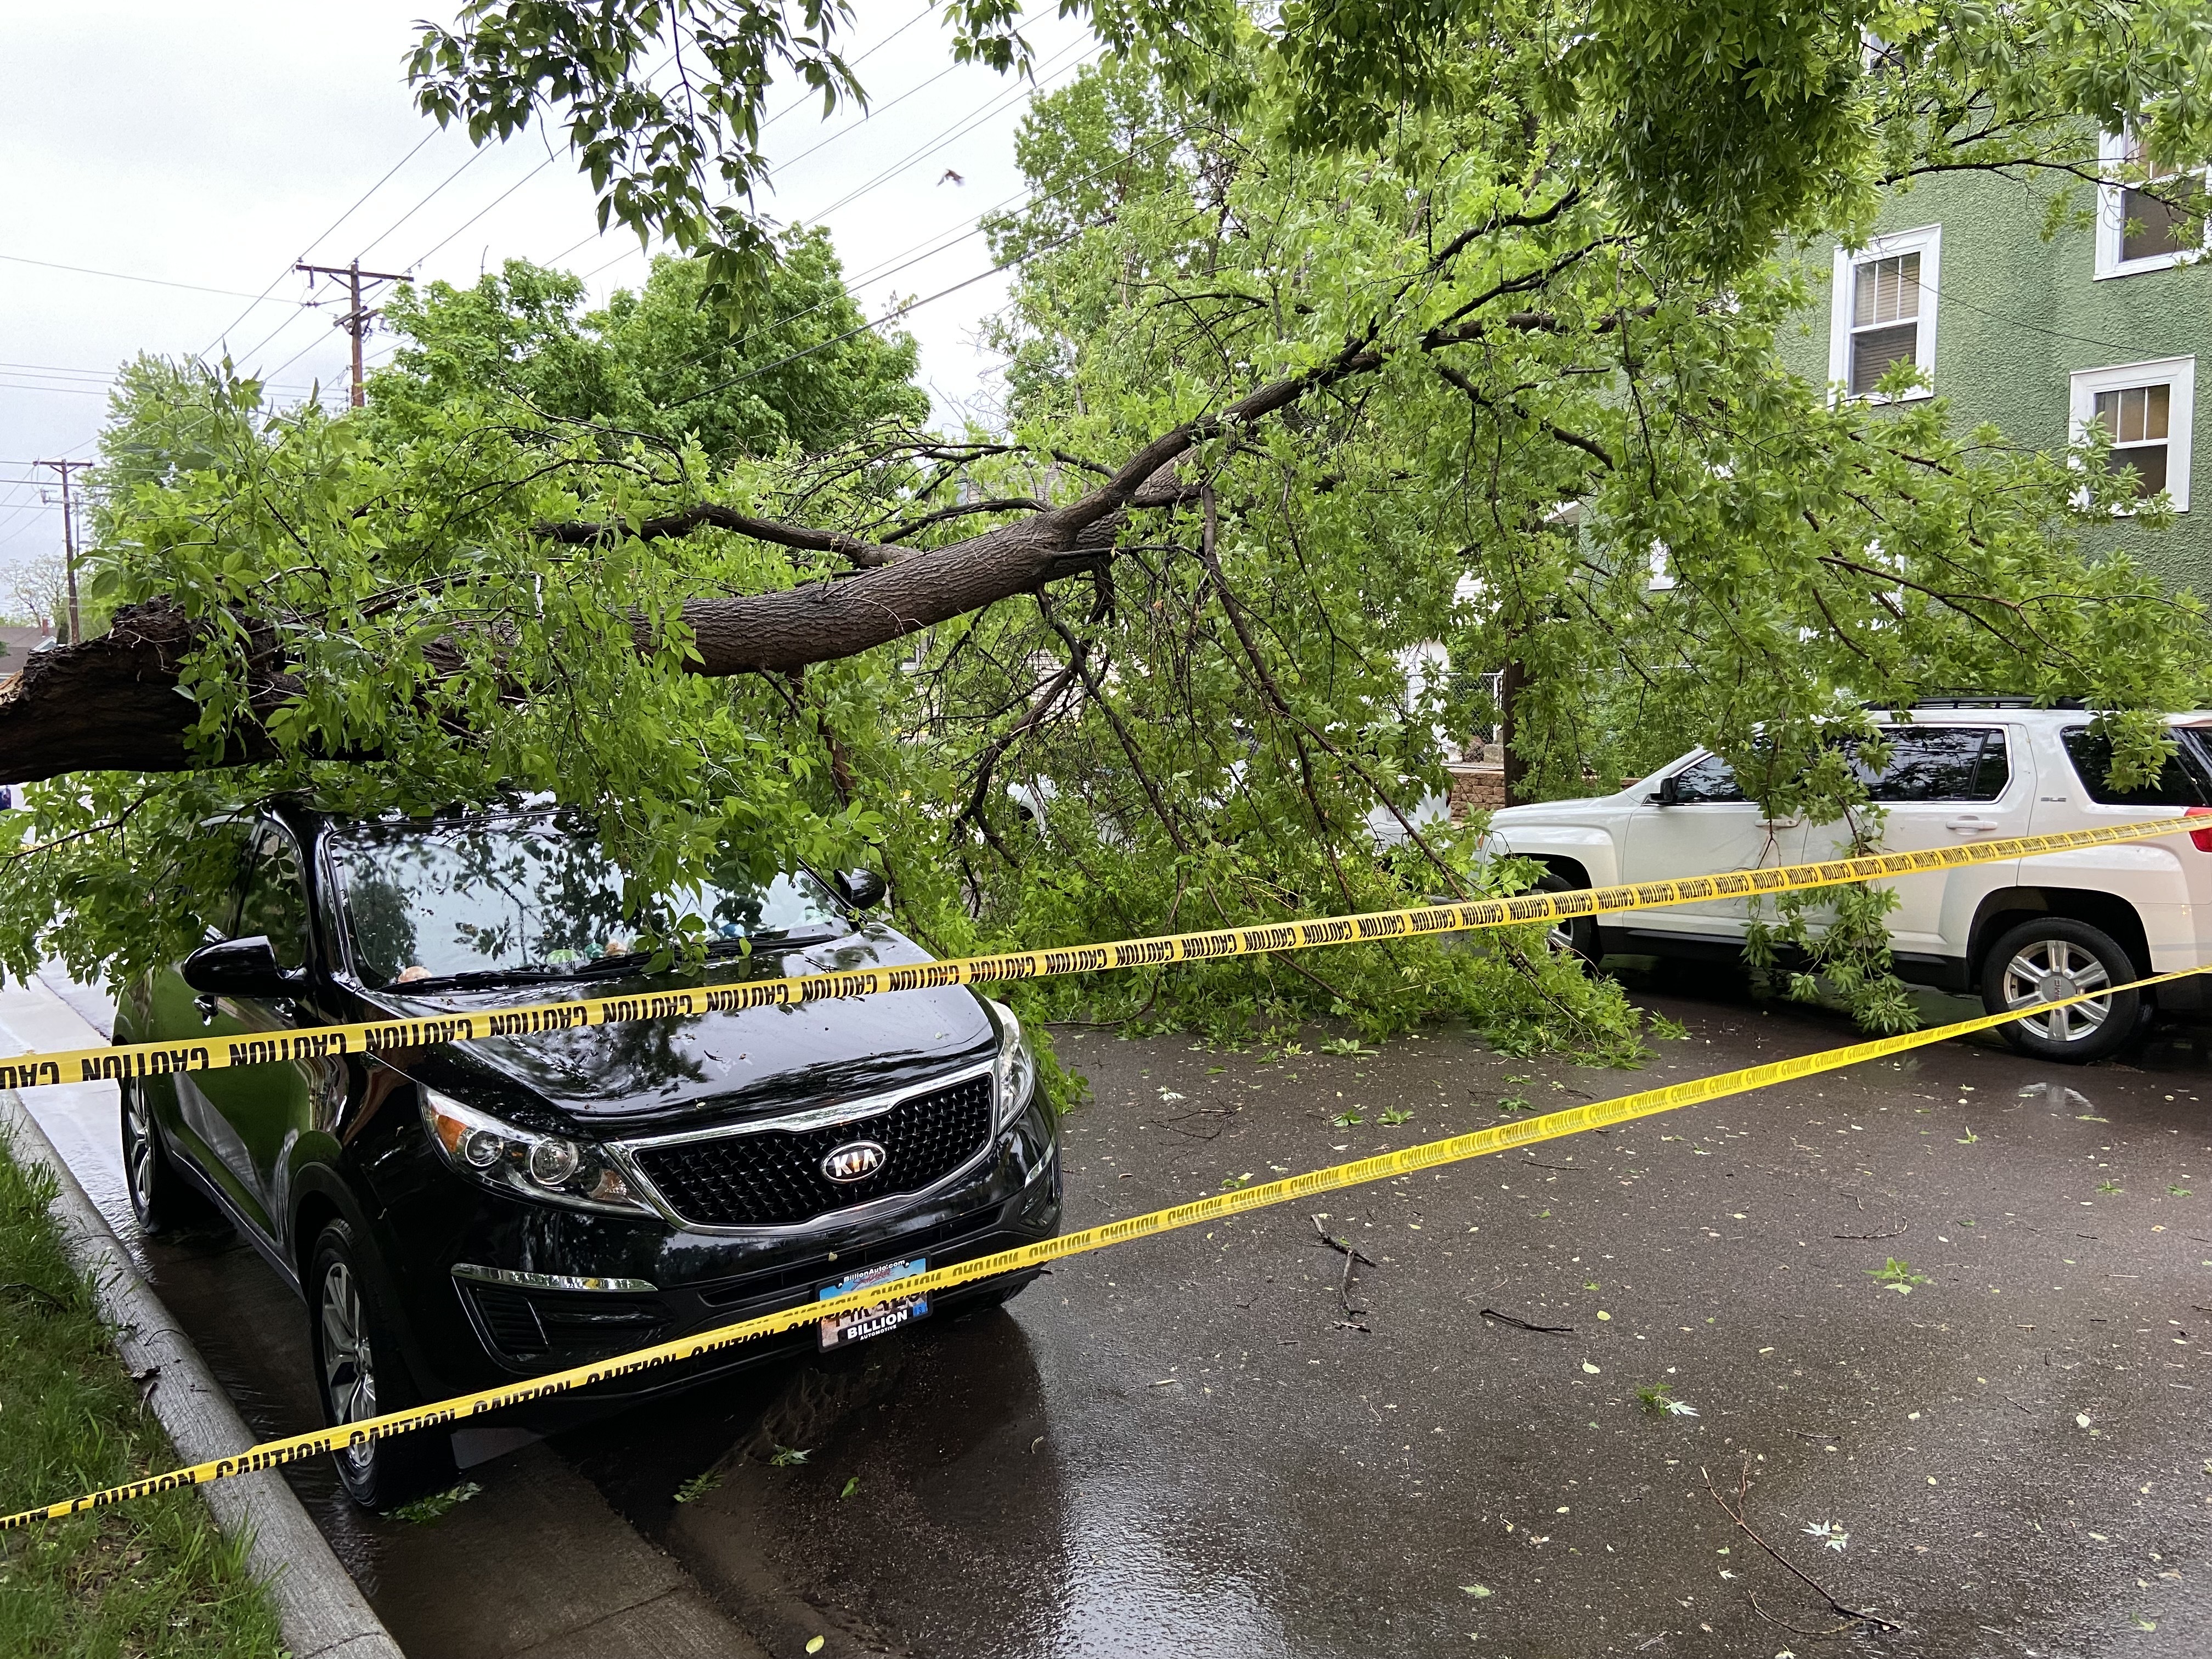 Large branches on cars.